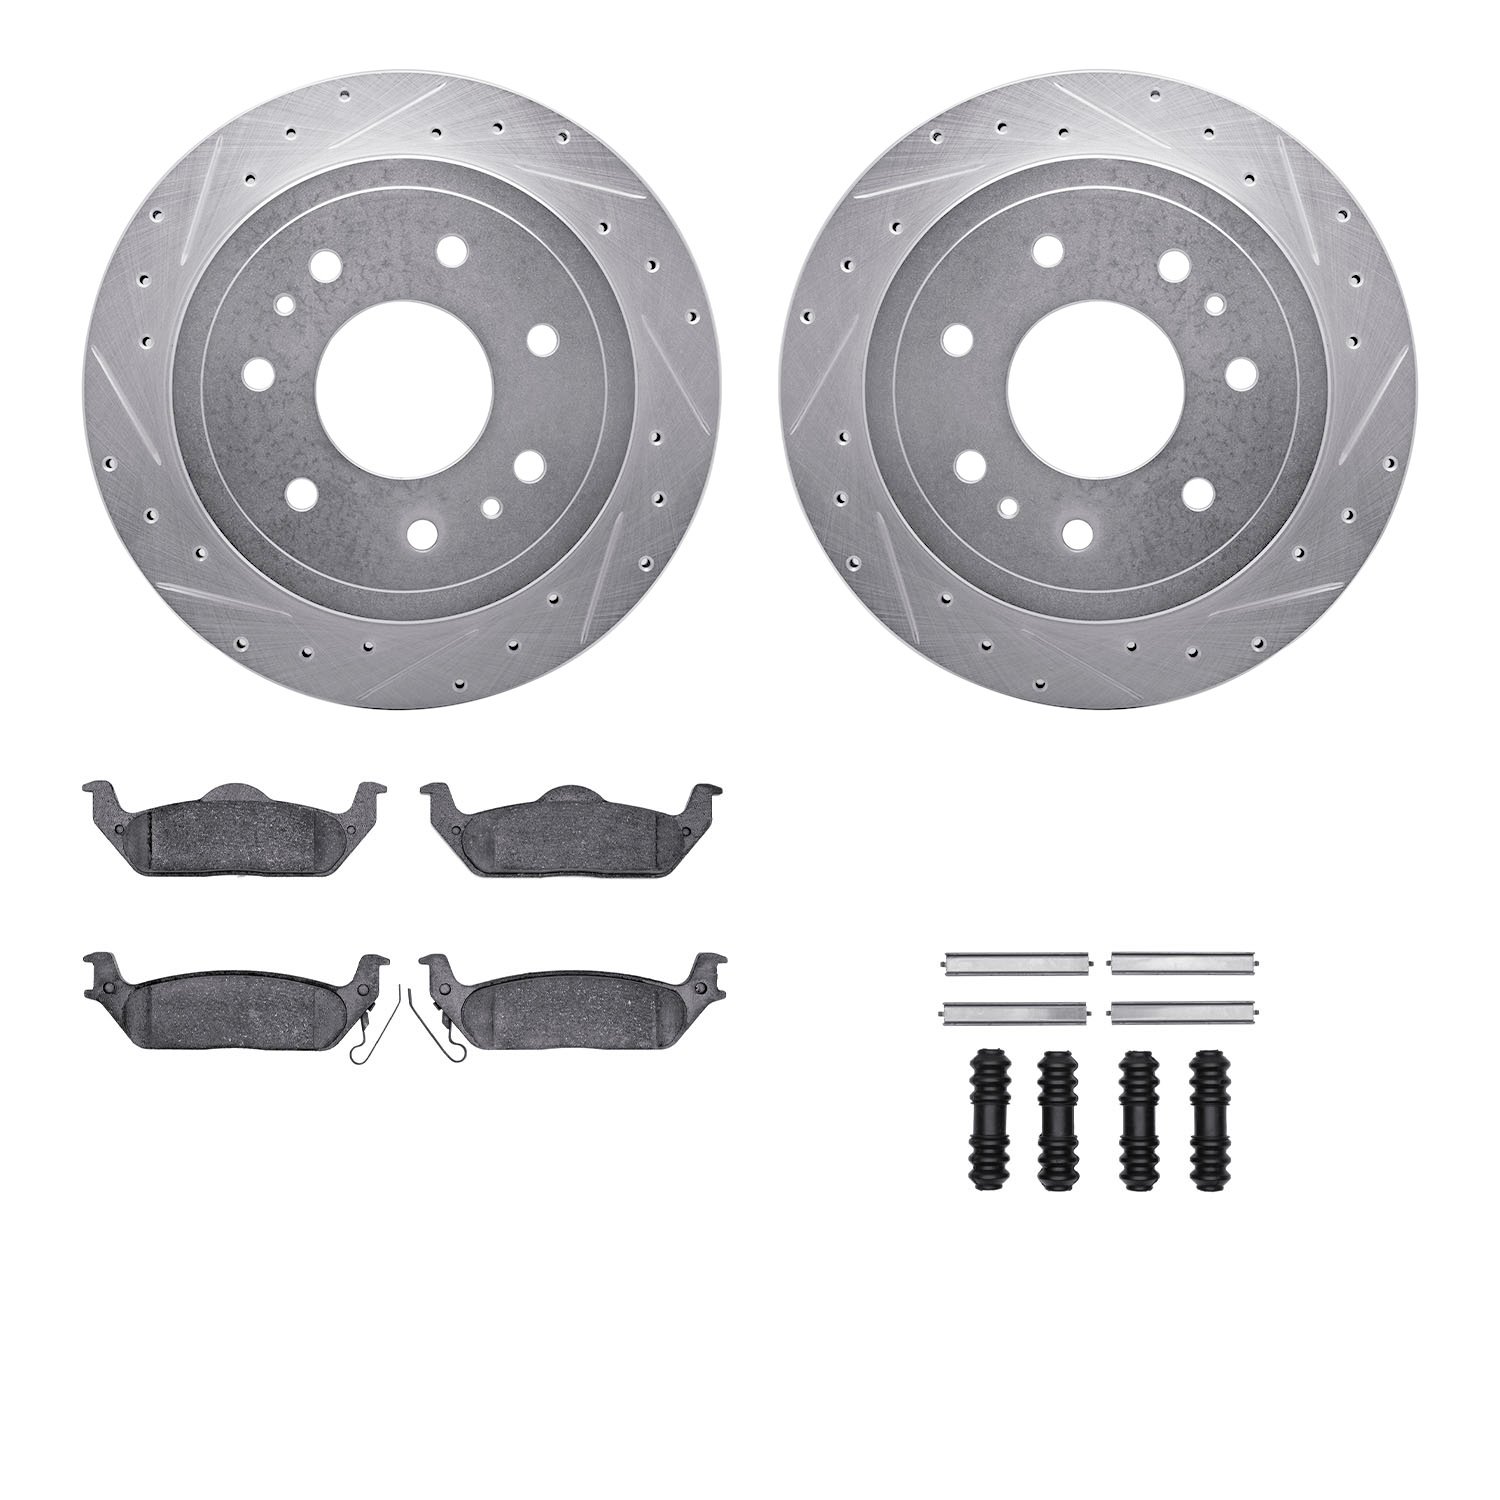 7312-54162 Drilled/Slotted Brake Rotor with 3000-Series Ceramic Brake Pads Kit & Hardware [Silver], 2004-2011 Ford/Lincoln/Mercu